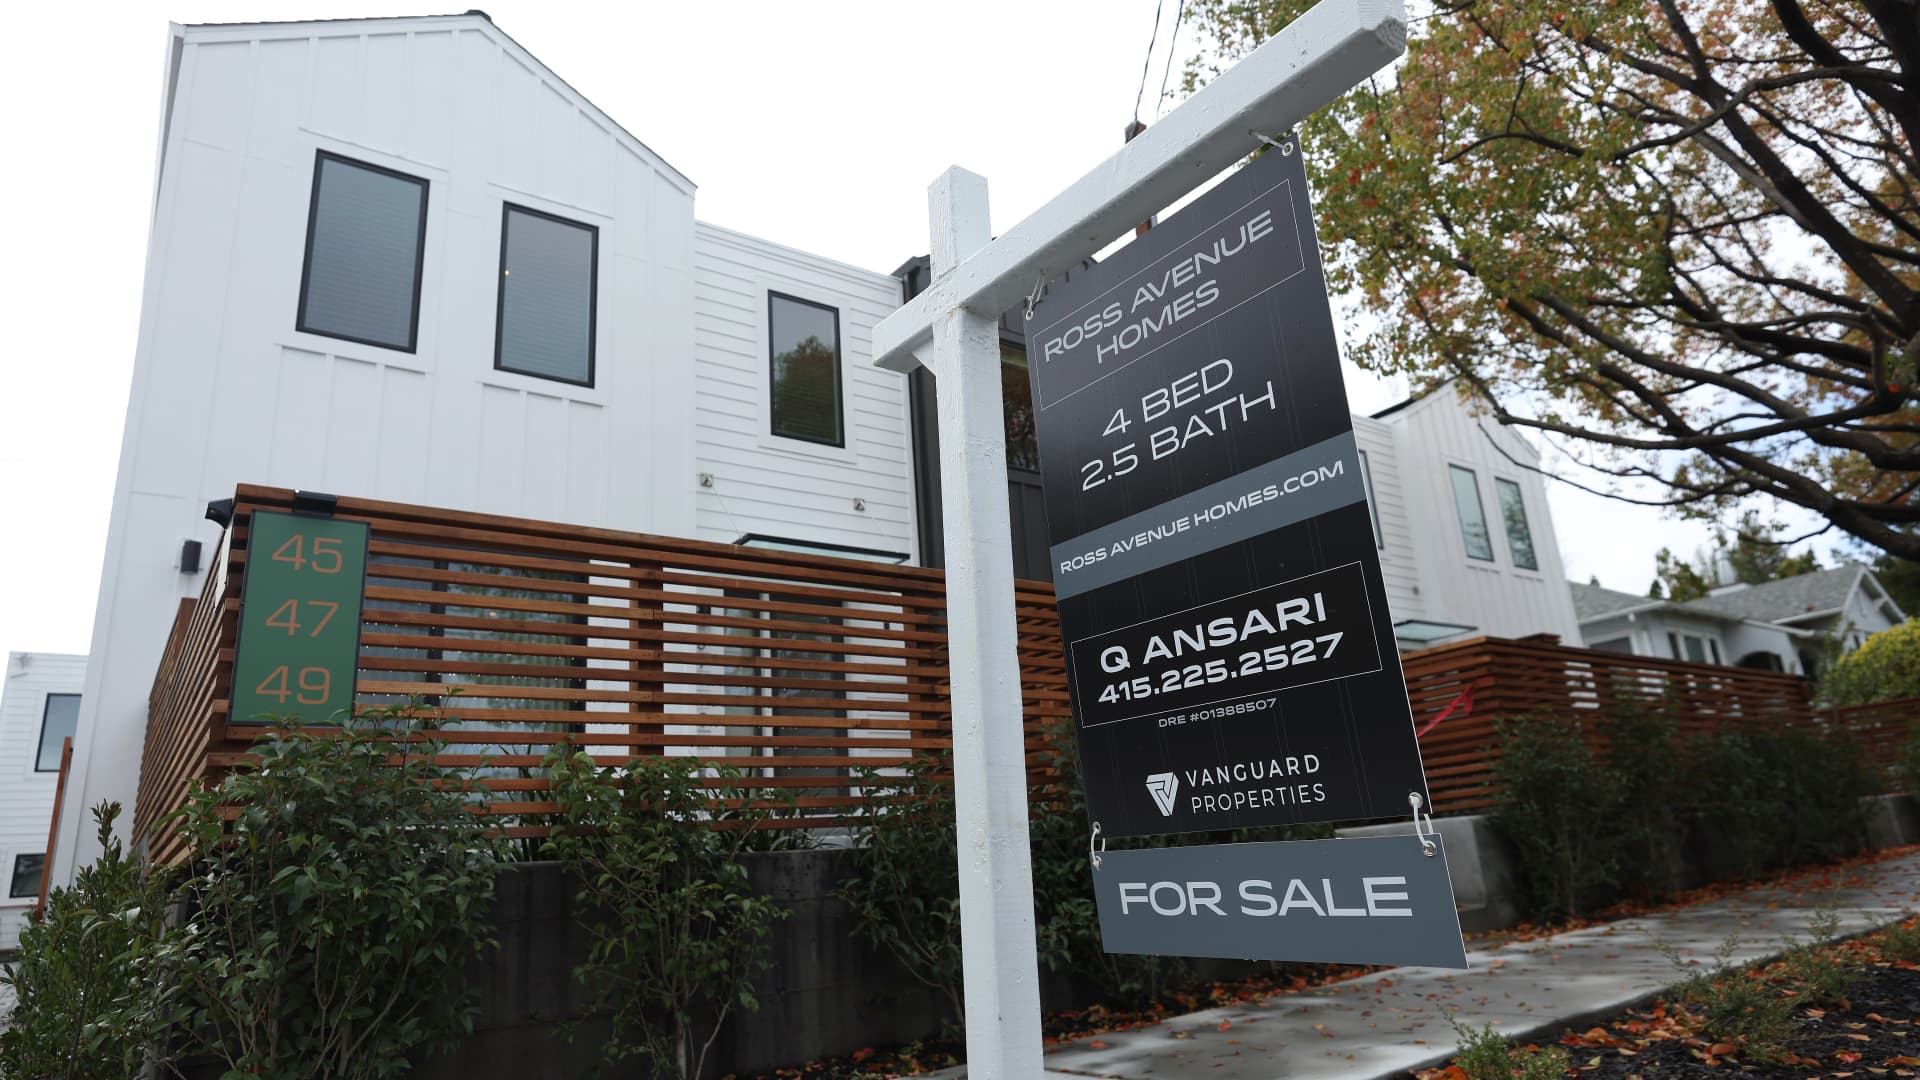 Home sales fall again in July, as supply drops to near quarter-century low